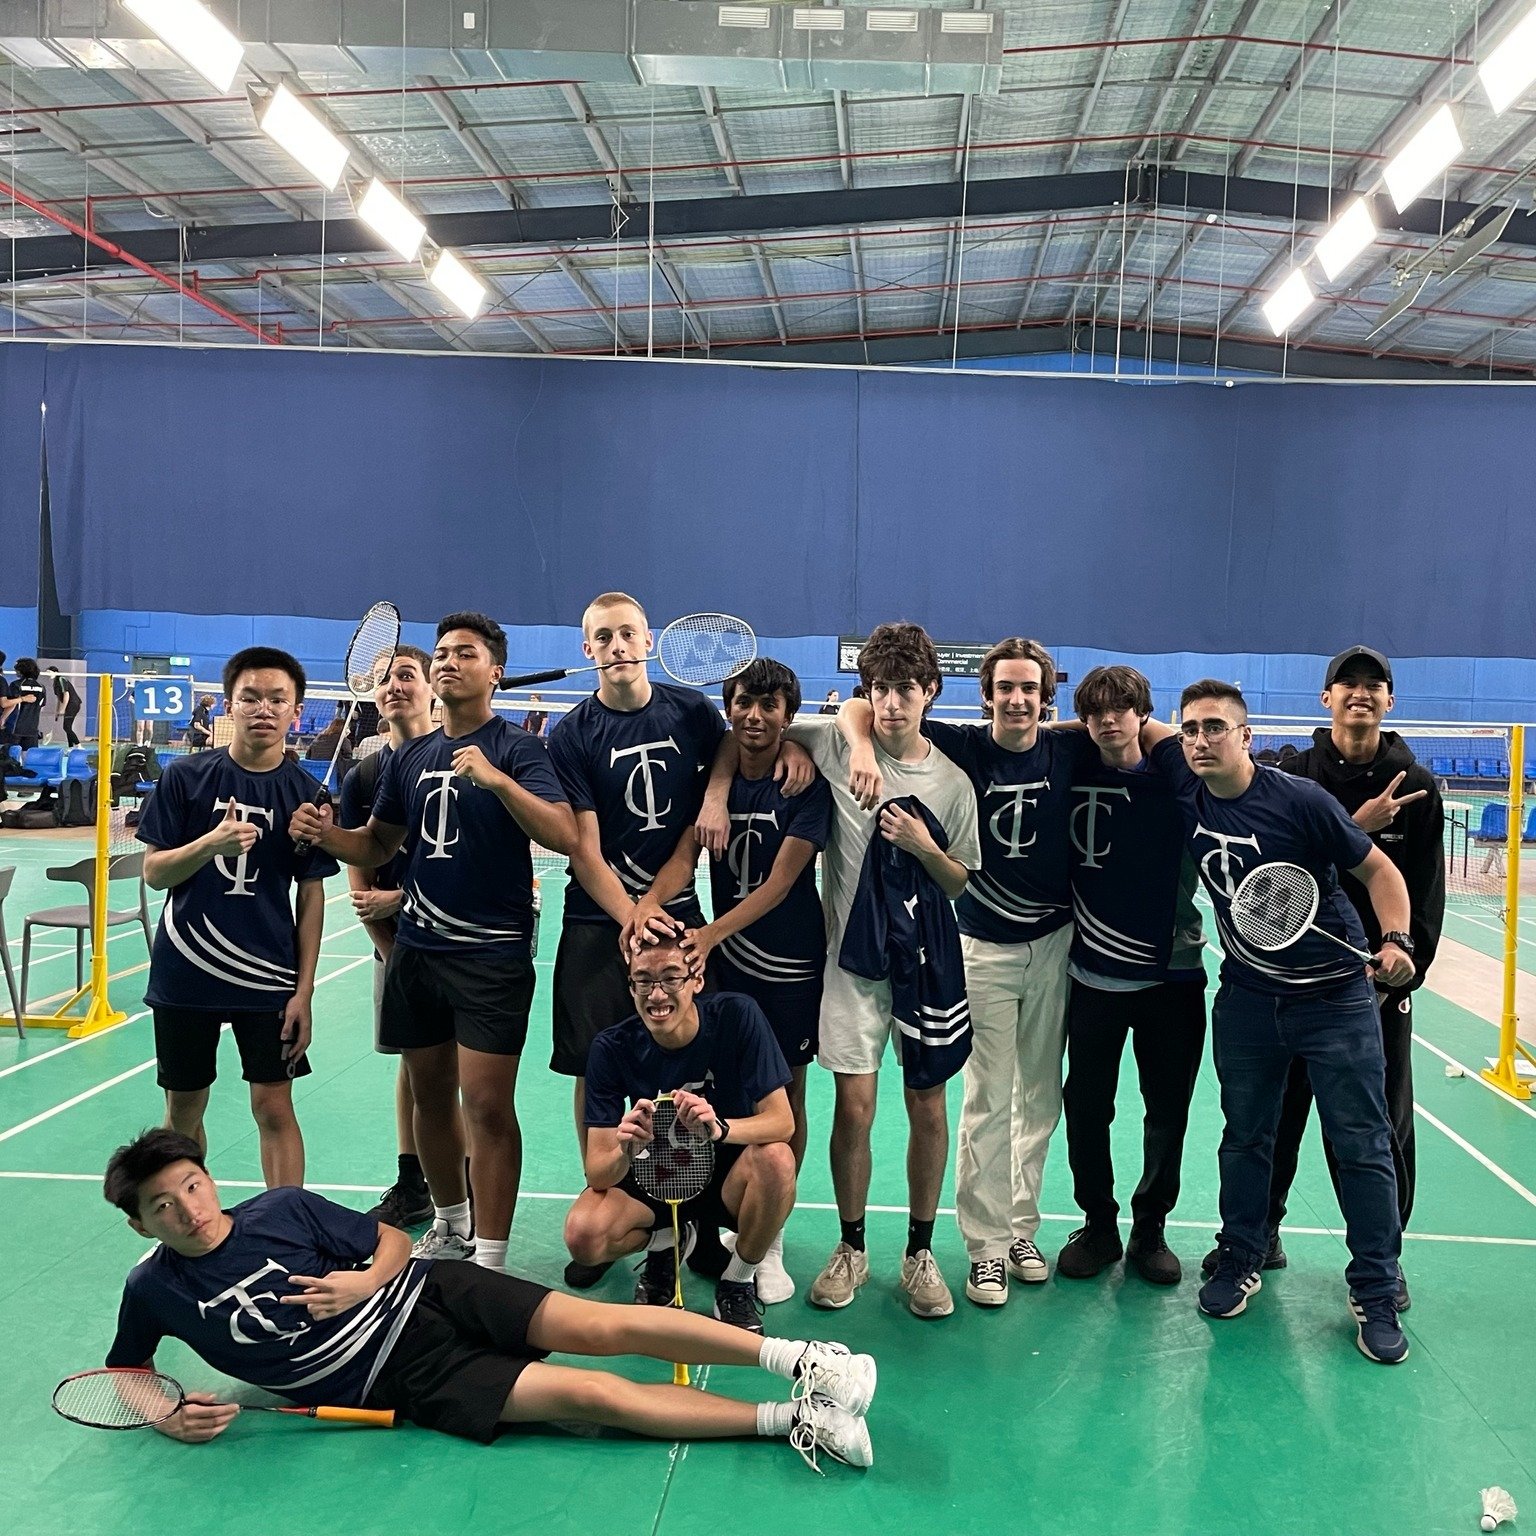 Senior Badminton competed in interschool division badminton yesterday coming away with a solid silver placement! 🥈🏸🎉 Congrats to the team 👏